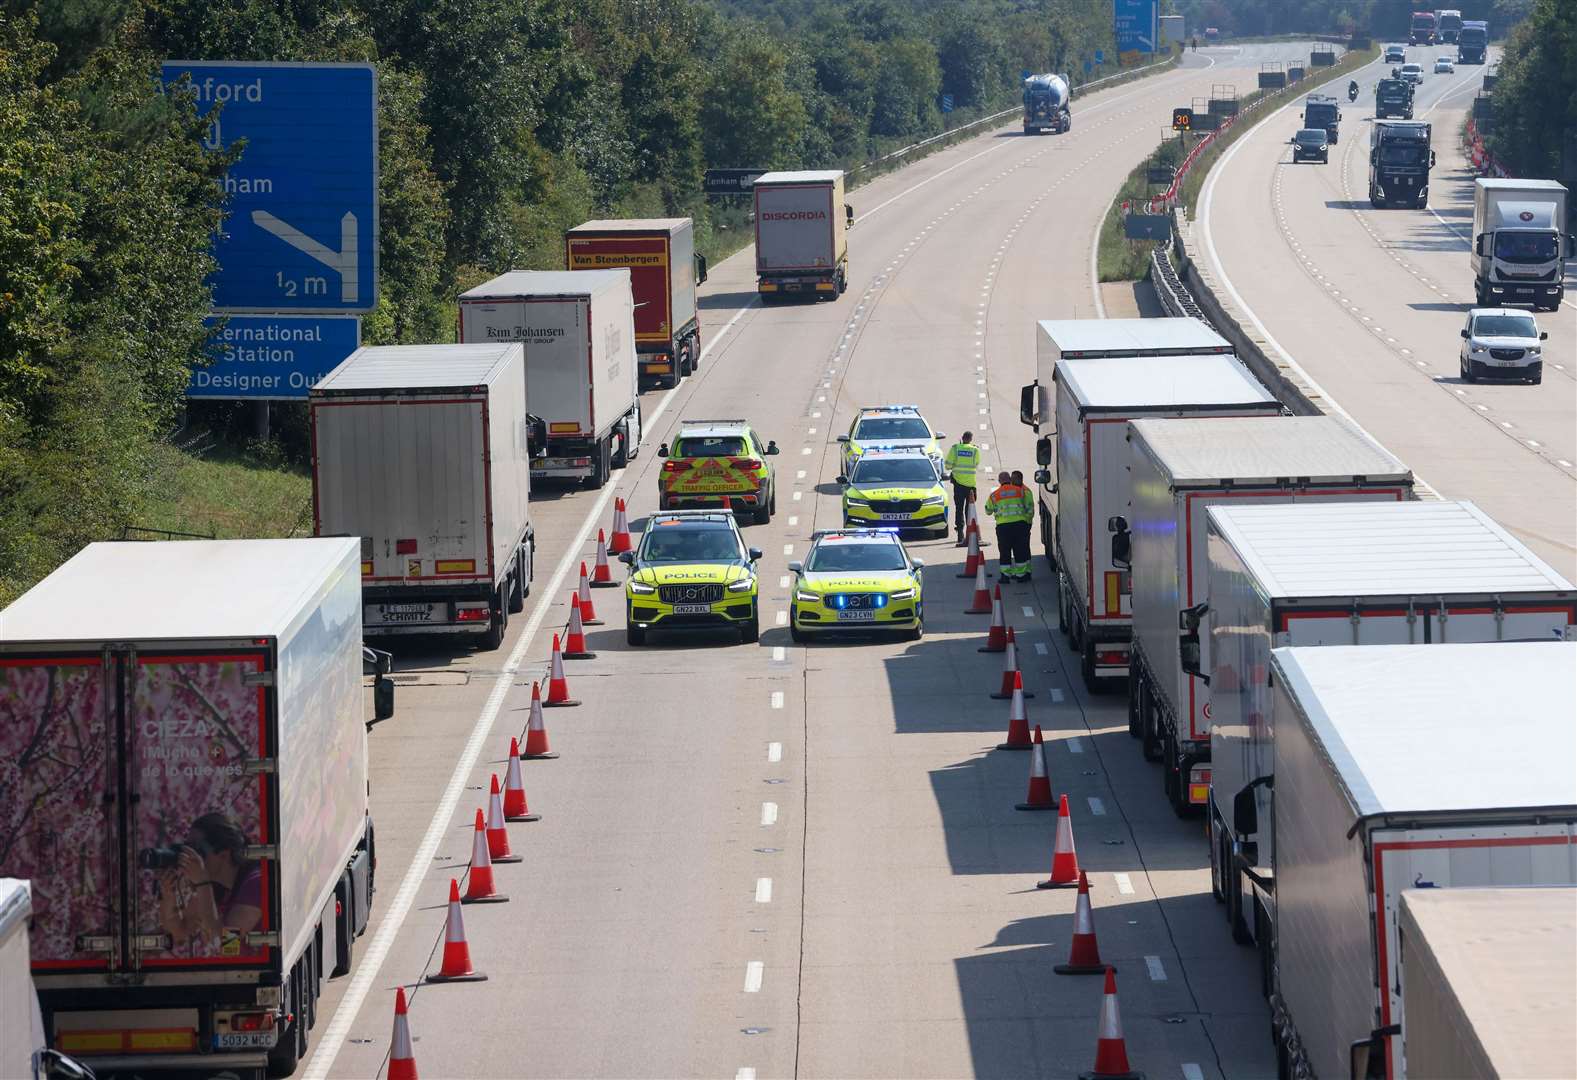 Police holding lorries on the M20 on the approach to Ashford. Picture: UKNIP